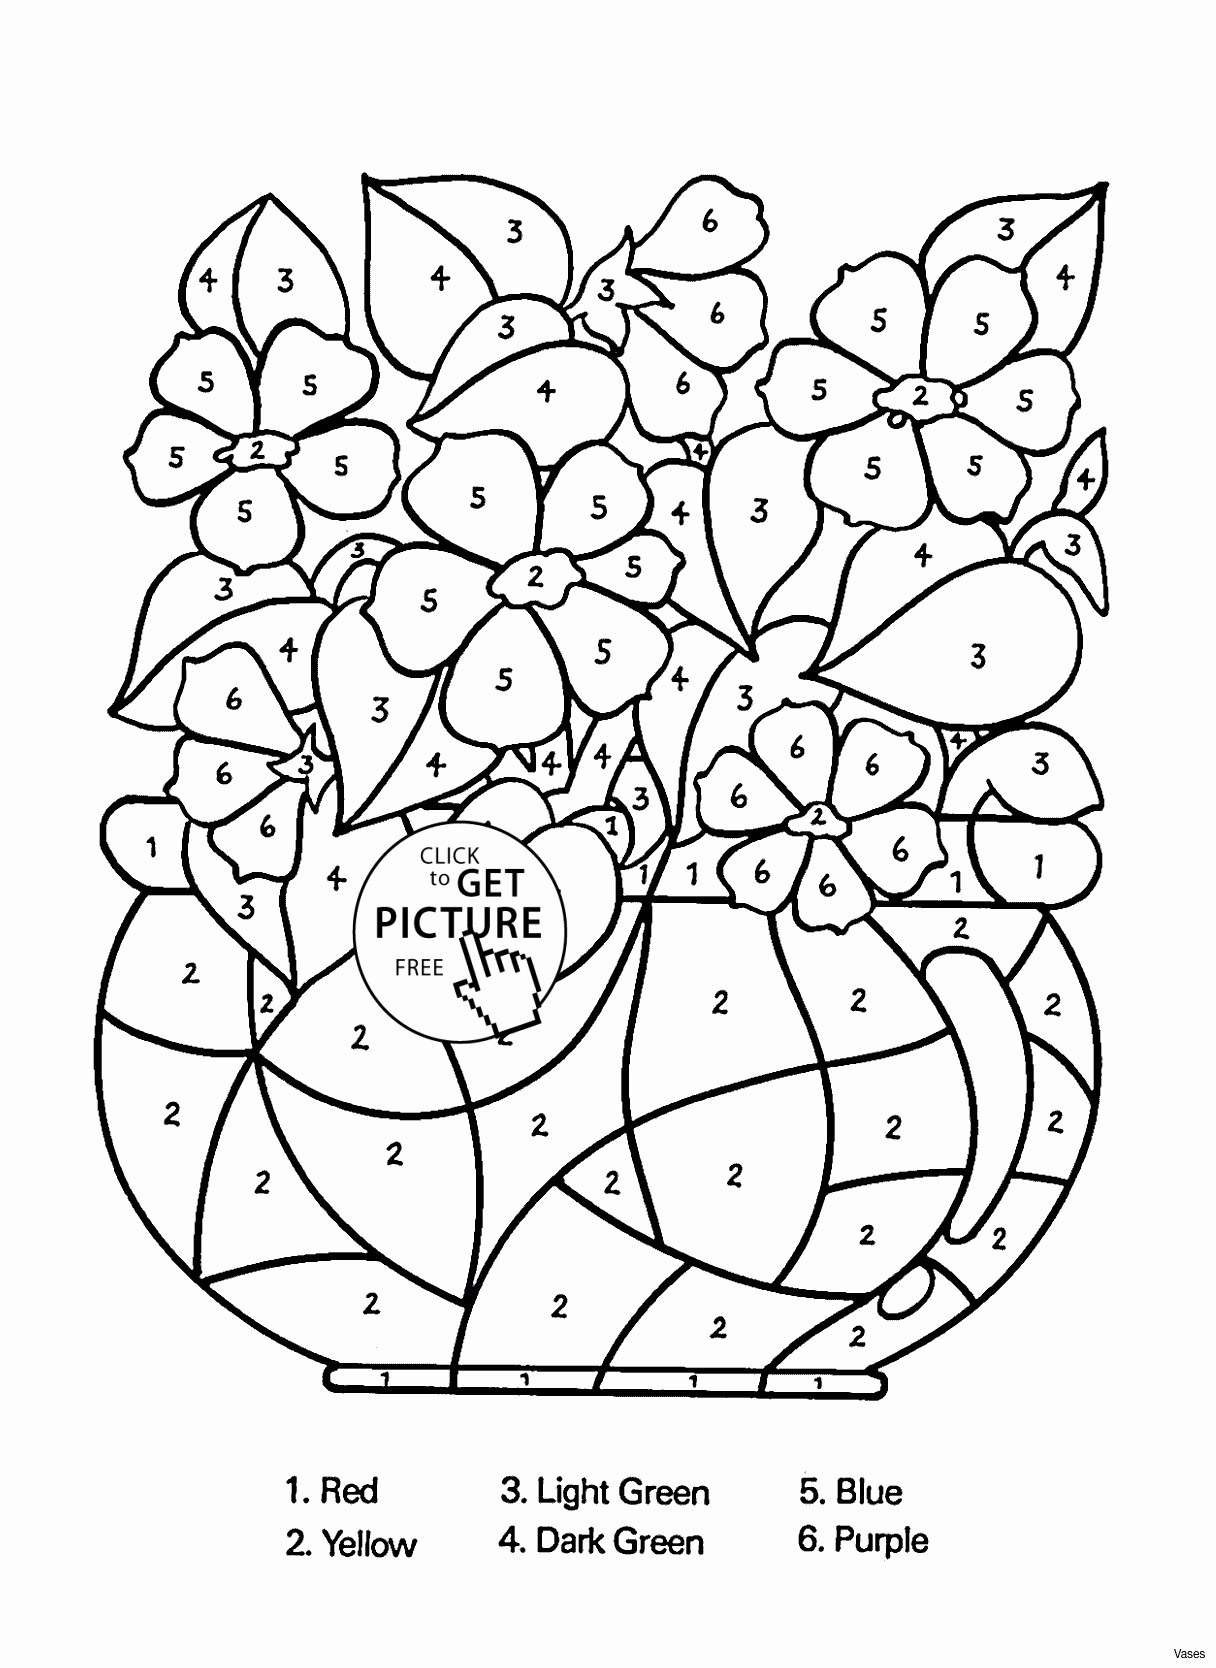 large sunflower vase of black and white vases collection vases flower vase coloring page regarding black and white vases collection vases flower vase coloring page pages flowers in a top i 0d and